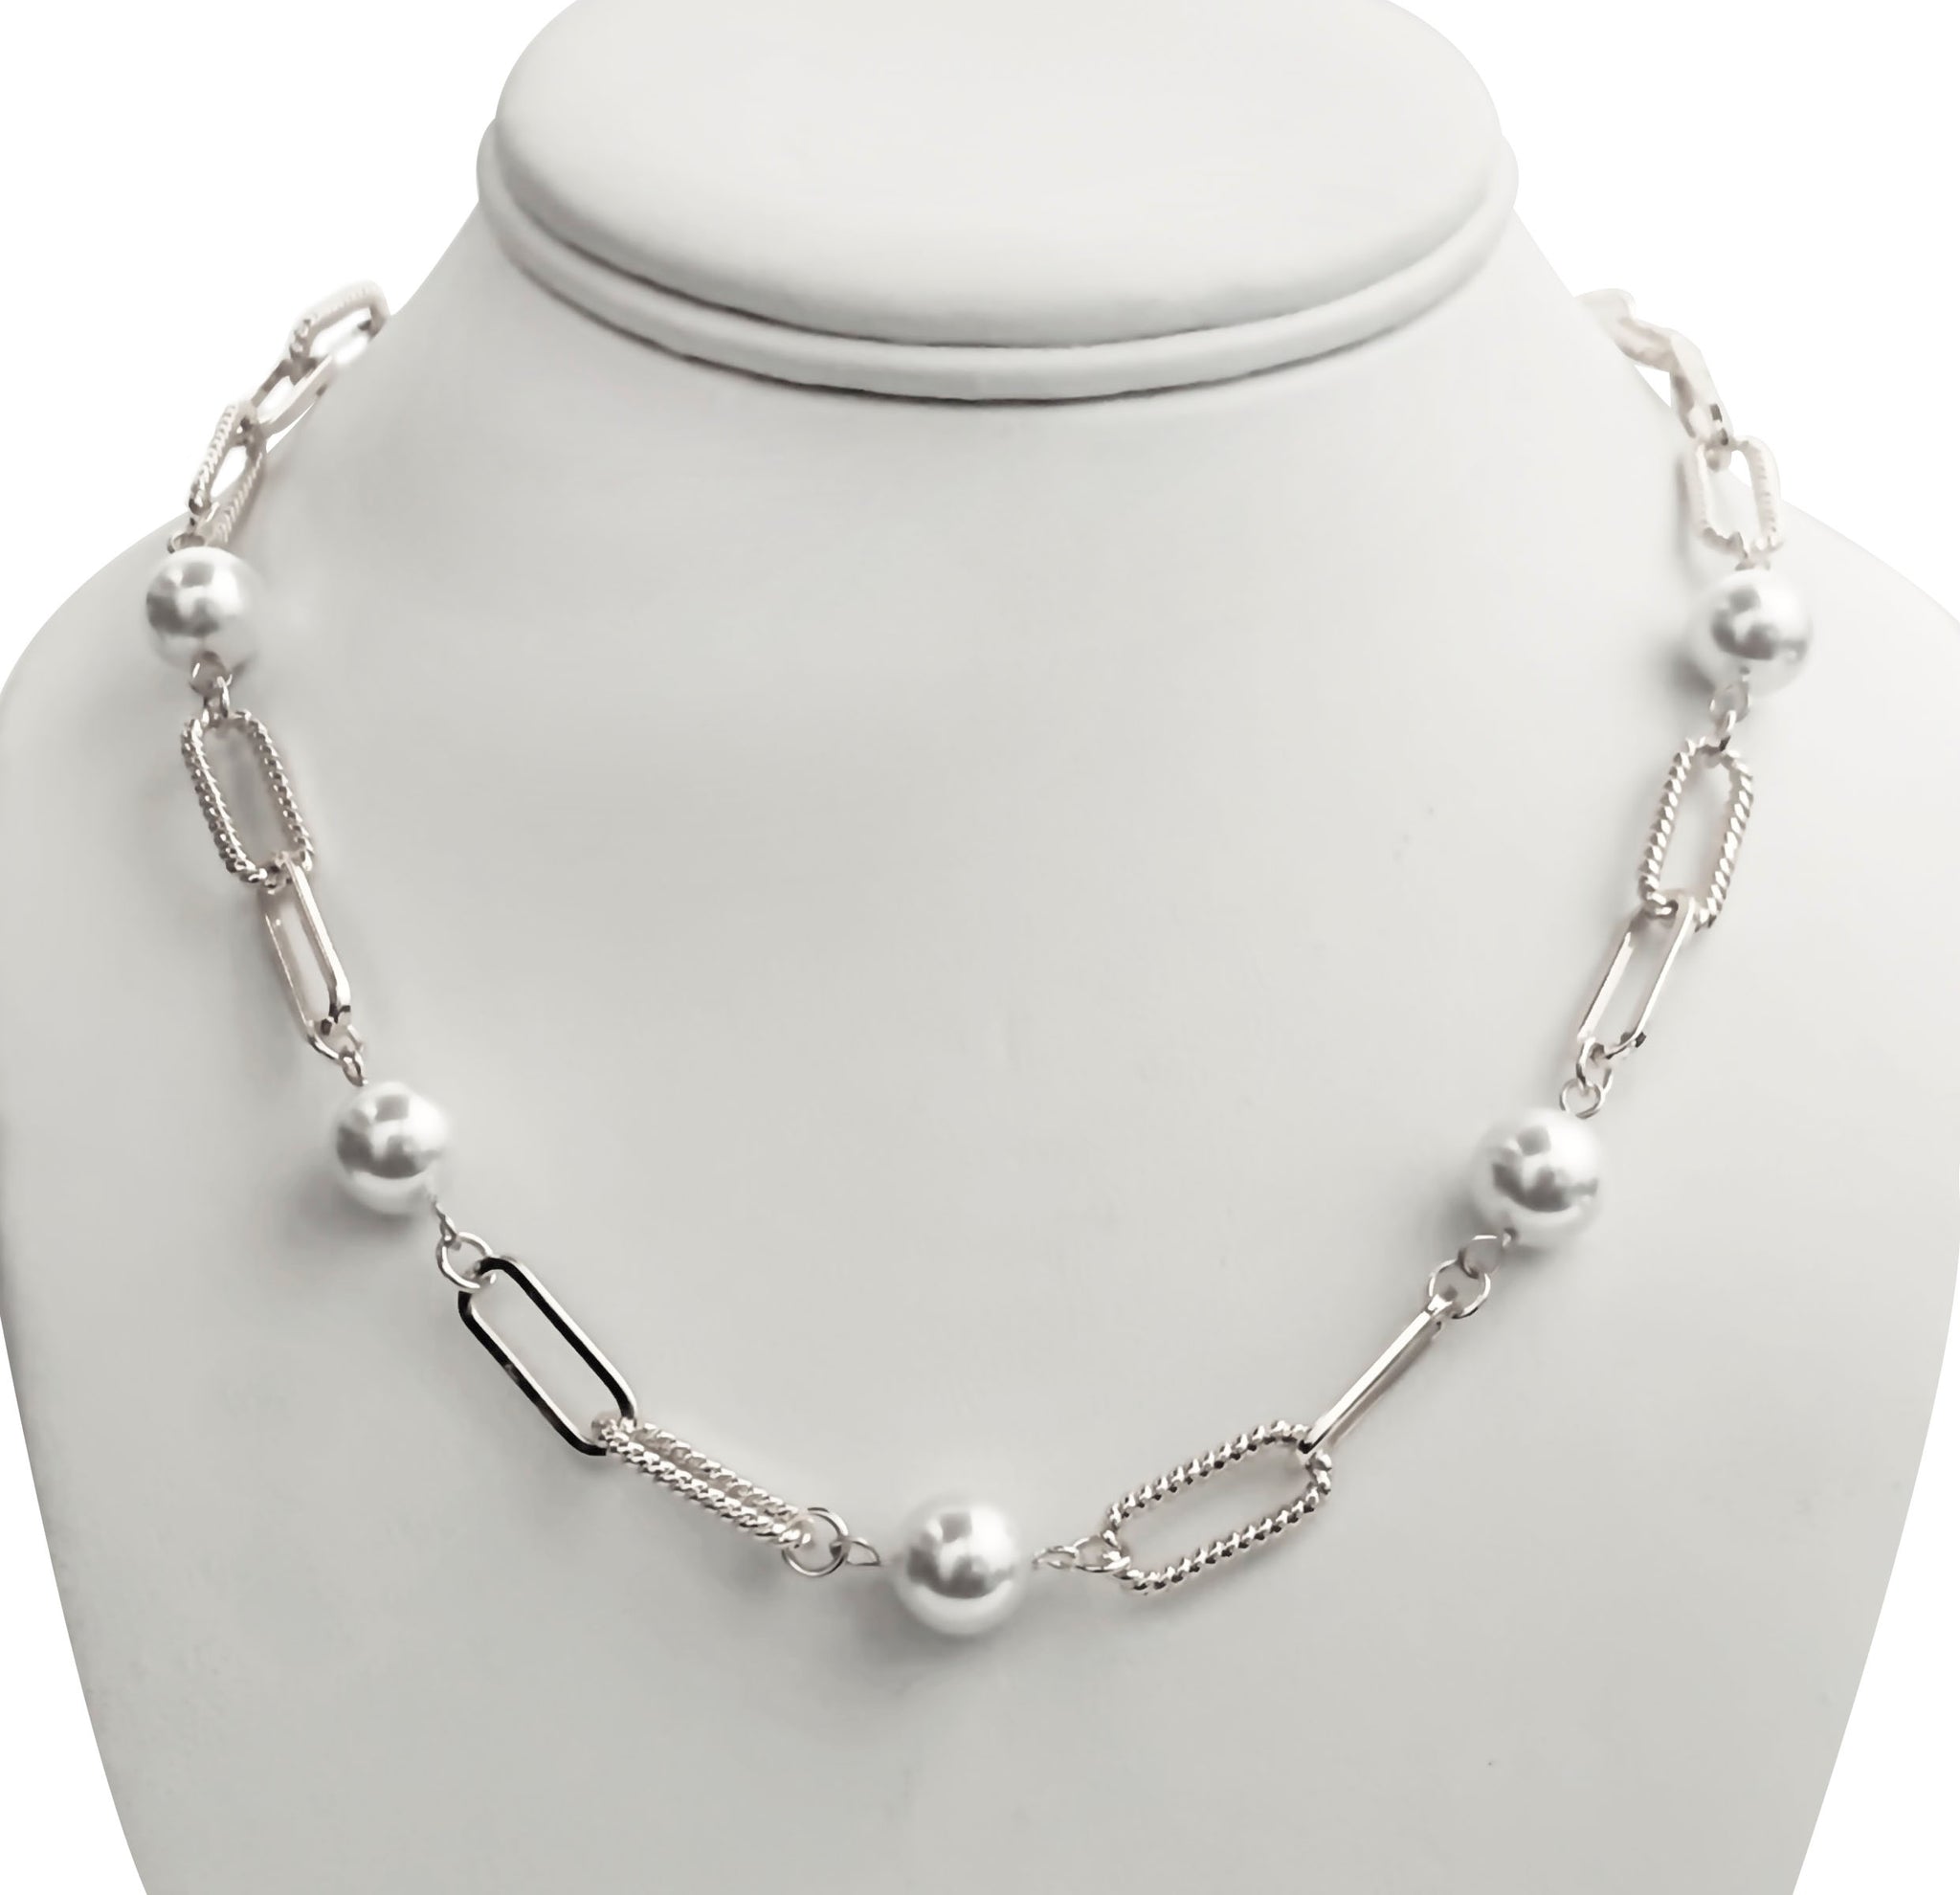 Adorable Marbella Style Paperclip & Cable Chain Pearl Necklace.